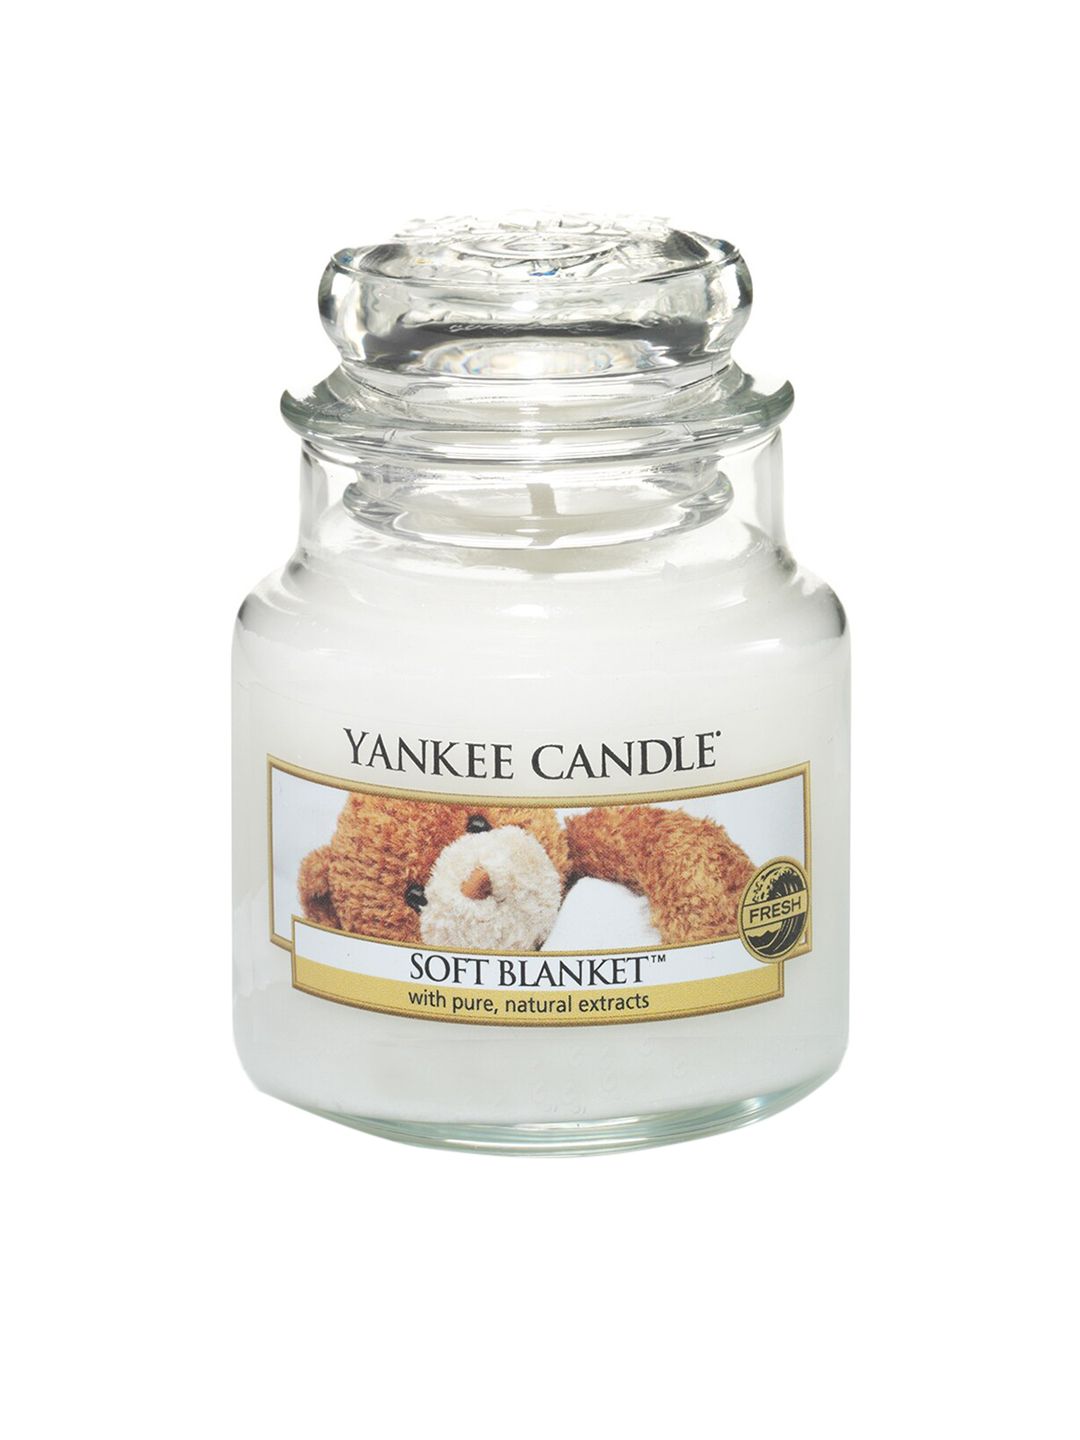 YANKEE CANDLE White Classic Small Jar Soft Blanket Scented Candles Price in India